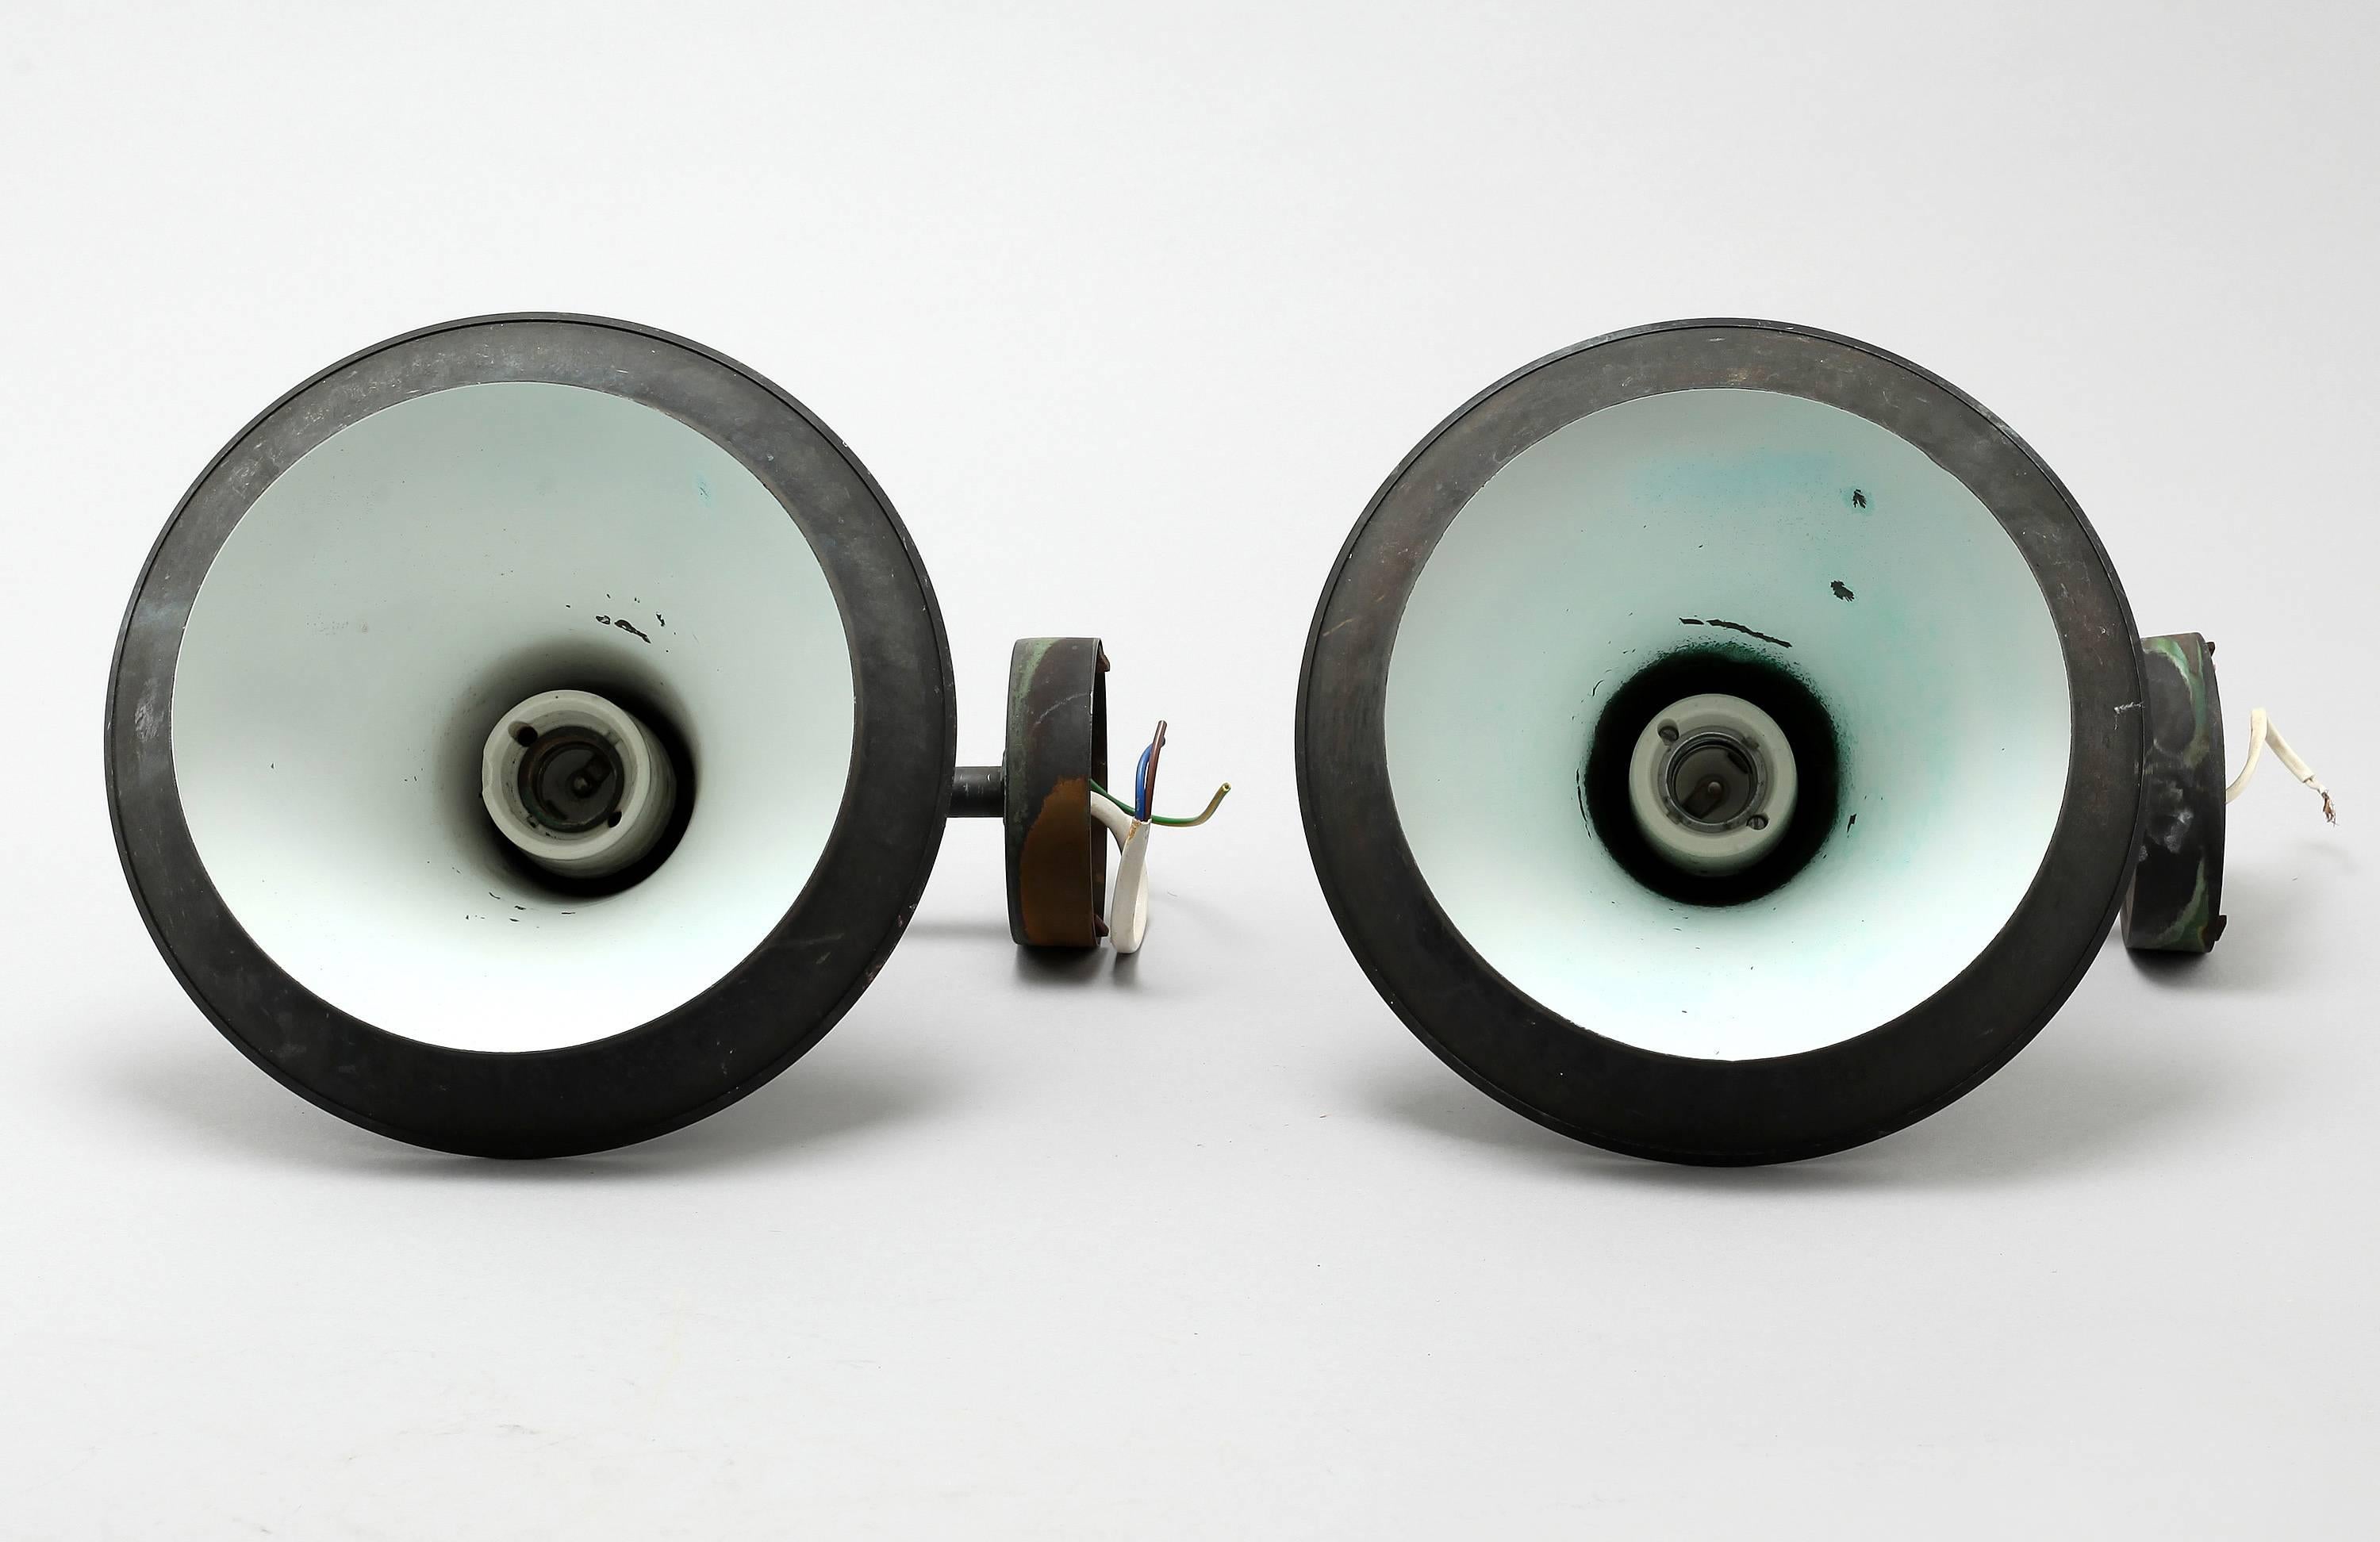 European Rare Hans-Agne Jakobsson Outdoor Wall Lamps in Copper